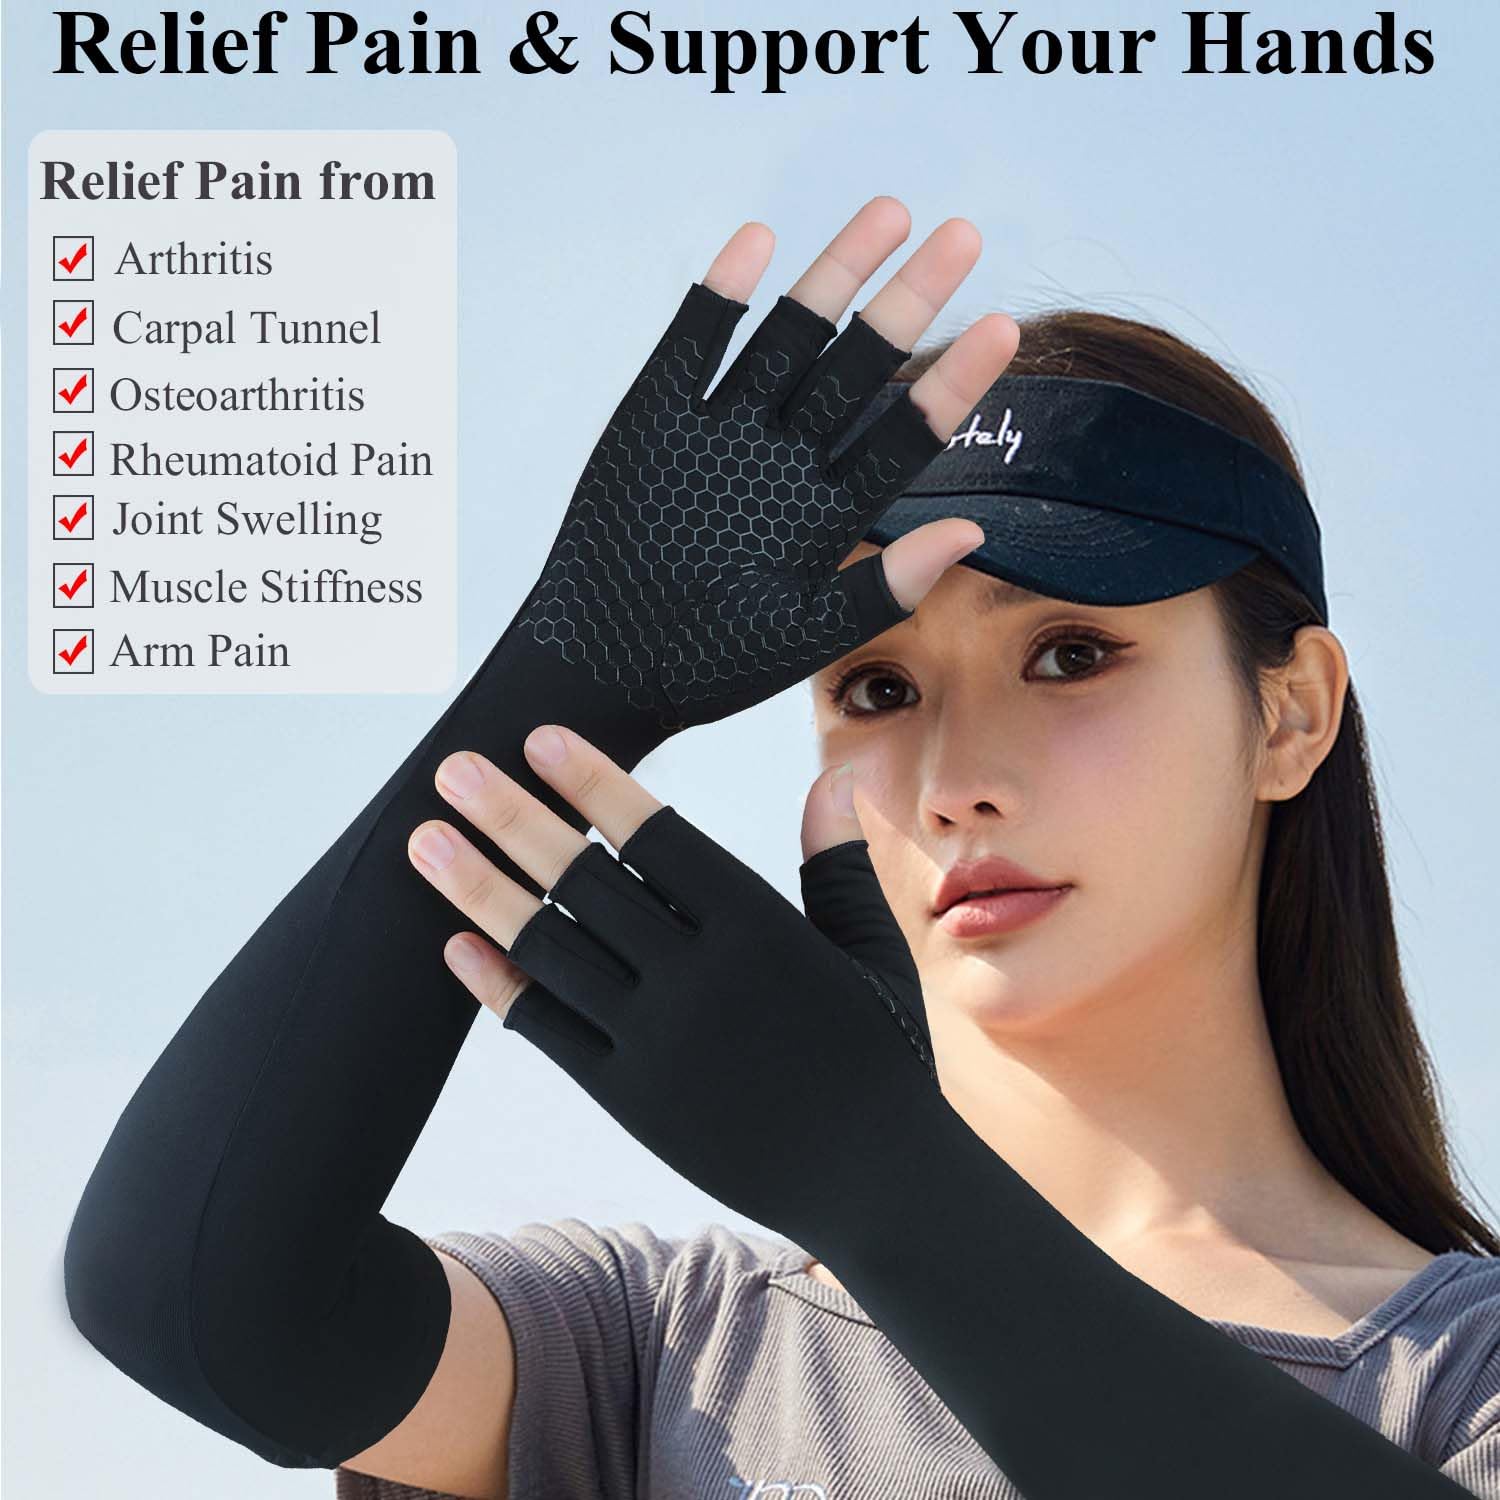 Long Copper Arthritis Gloves for Carpal Tunnel, Compression Gloves for Hand Pain Relief, Wrist Arm Support, Fingerless Typing Gloves for Rheumatoid, Tendonitis, Fits Women Men, 1 Pair